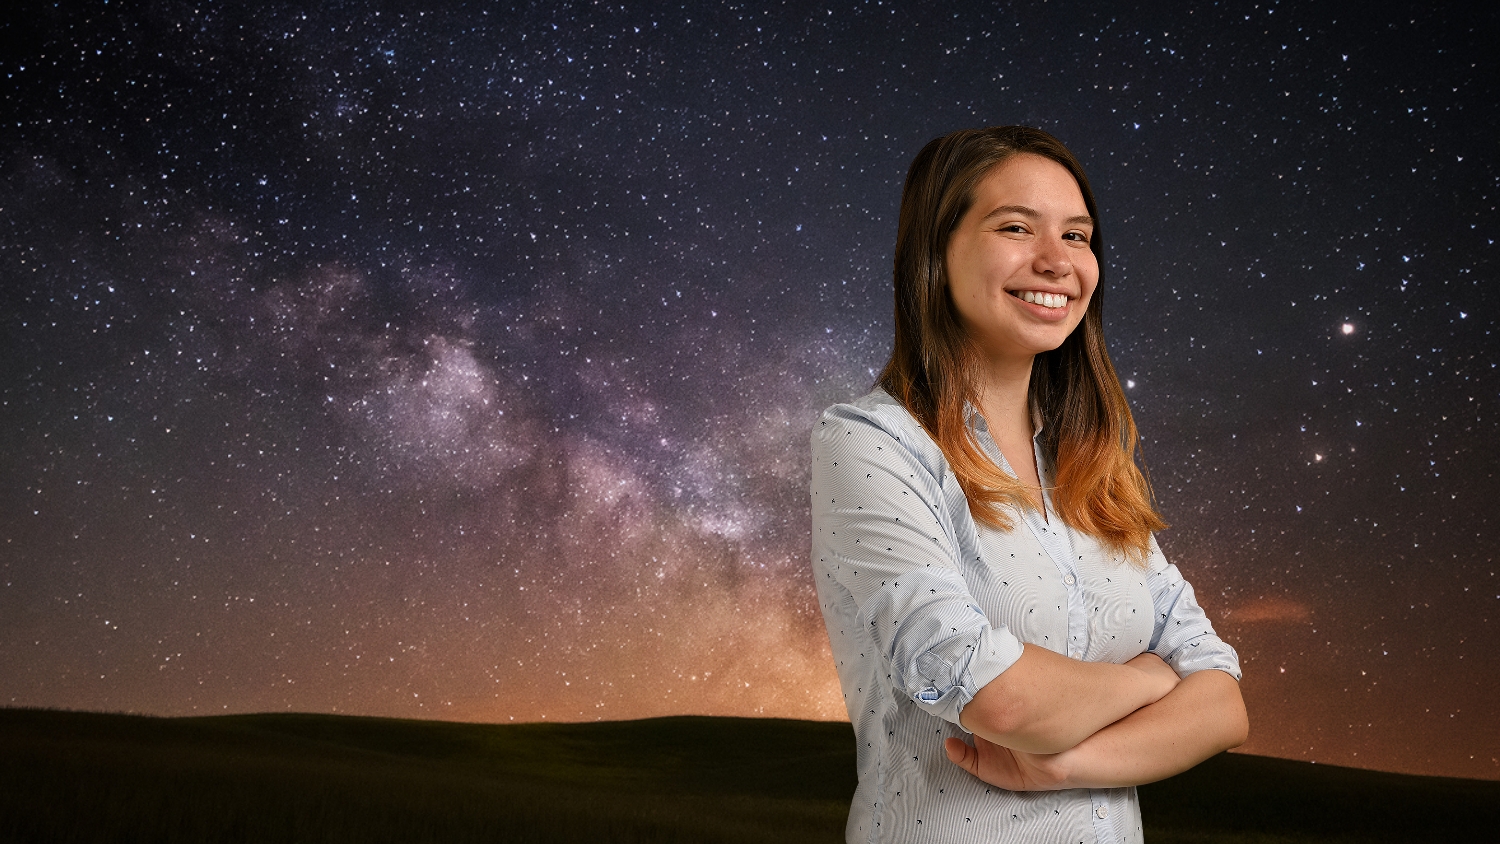 Ana Sofia Uzsoy stands in front of a starry sky backdrop.